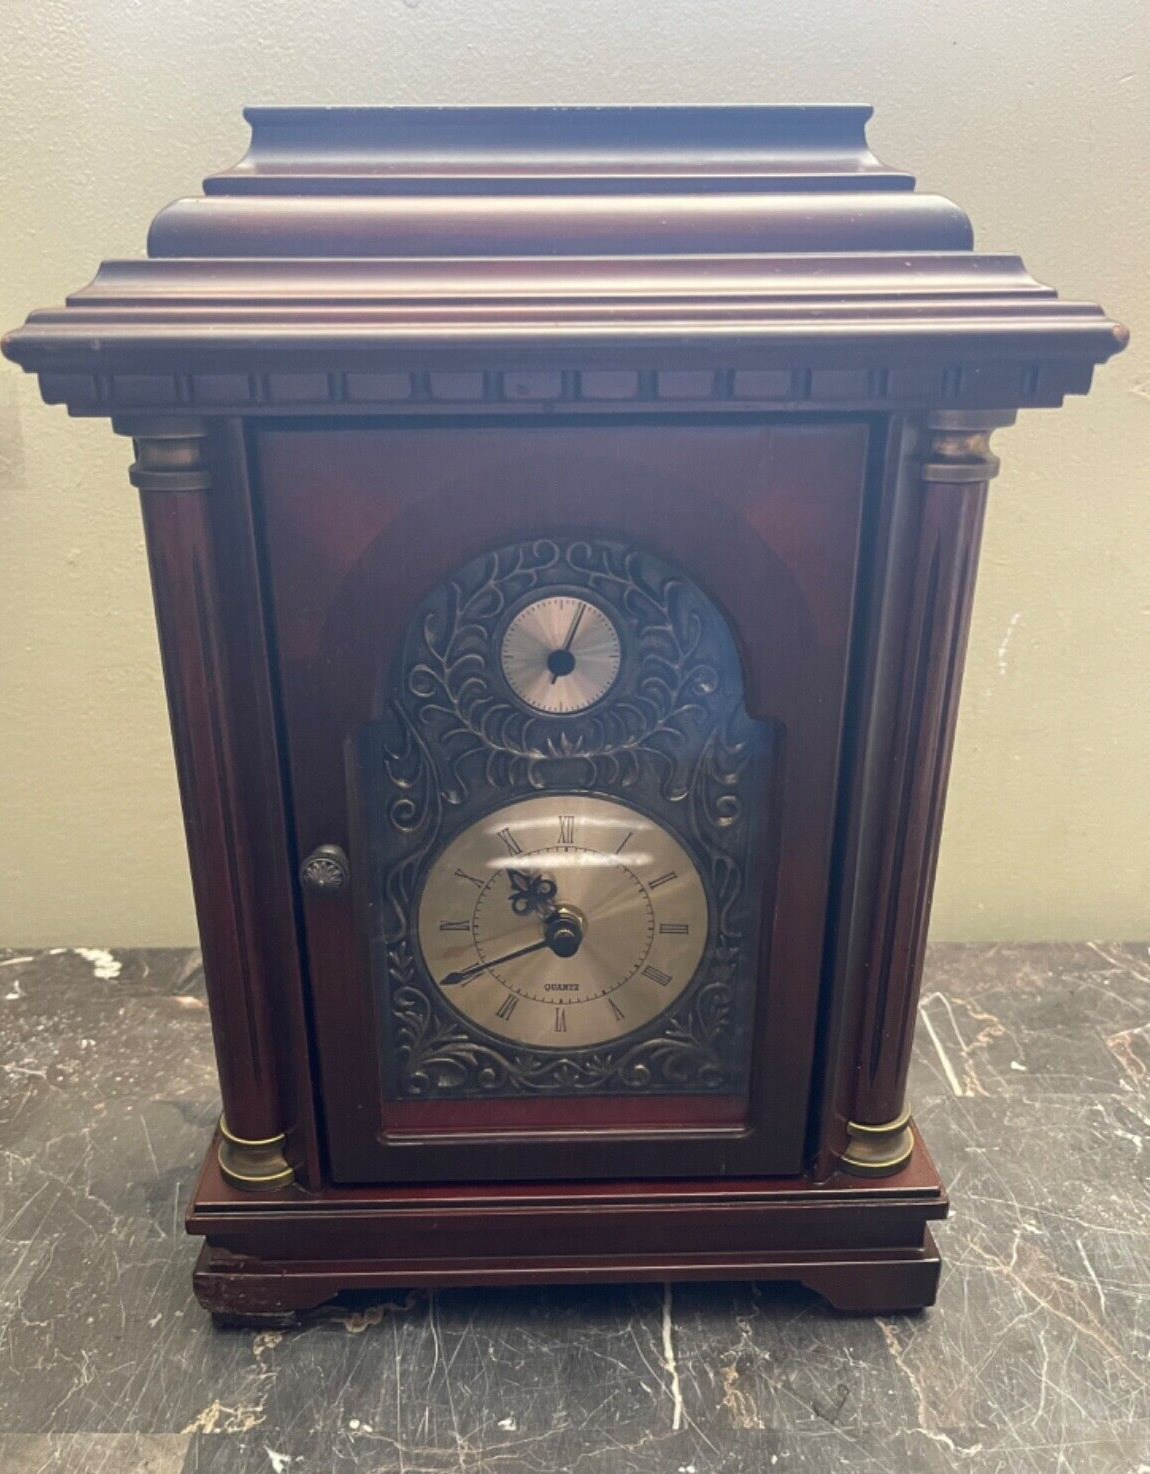 Vintage Bombay Company 2006 Solid Wood Mantle Clock with Separate Seconds Dial.